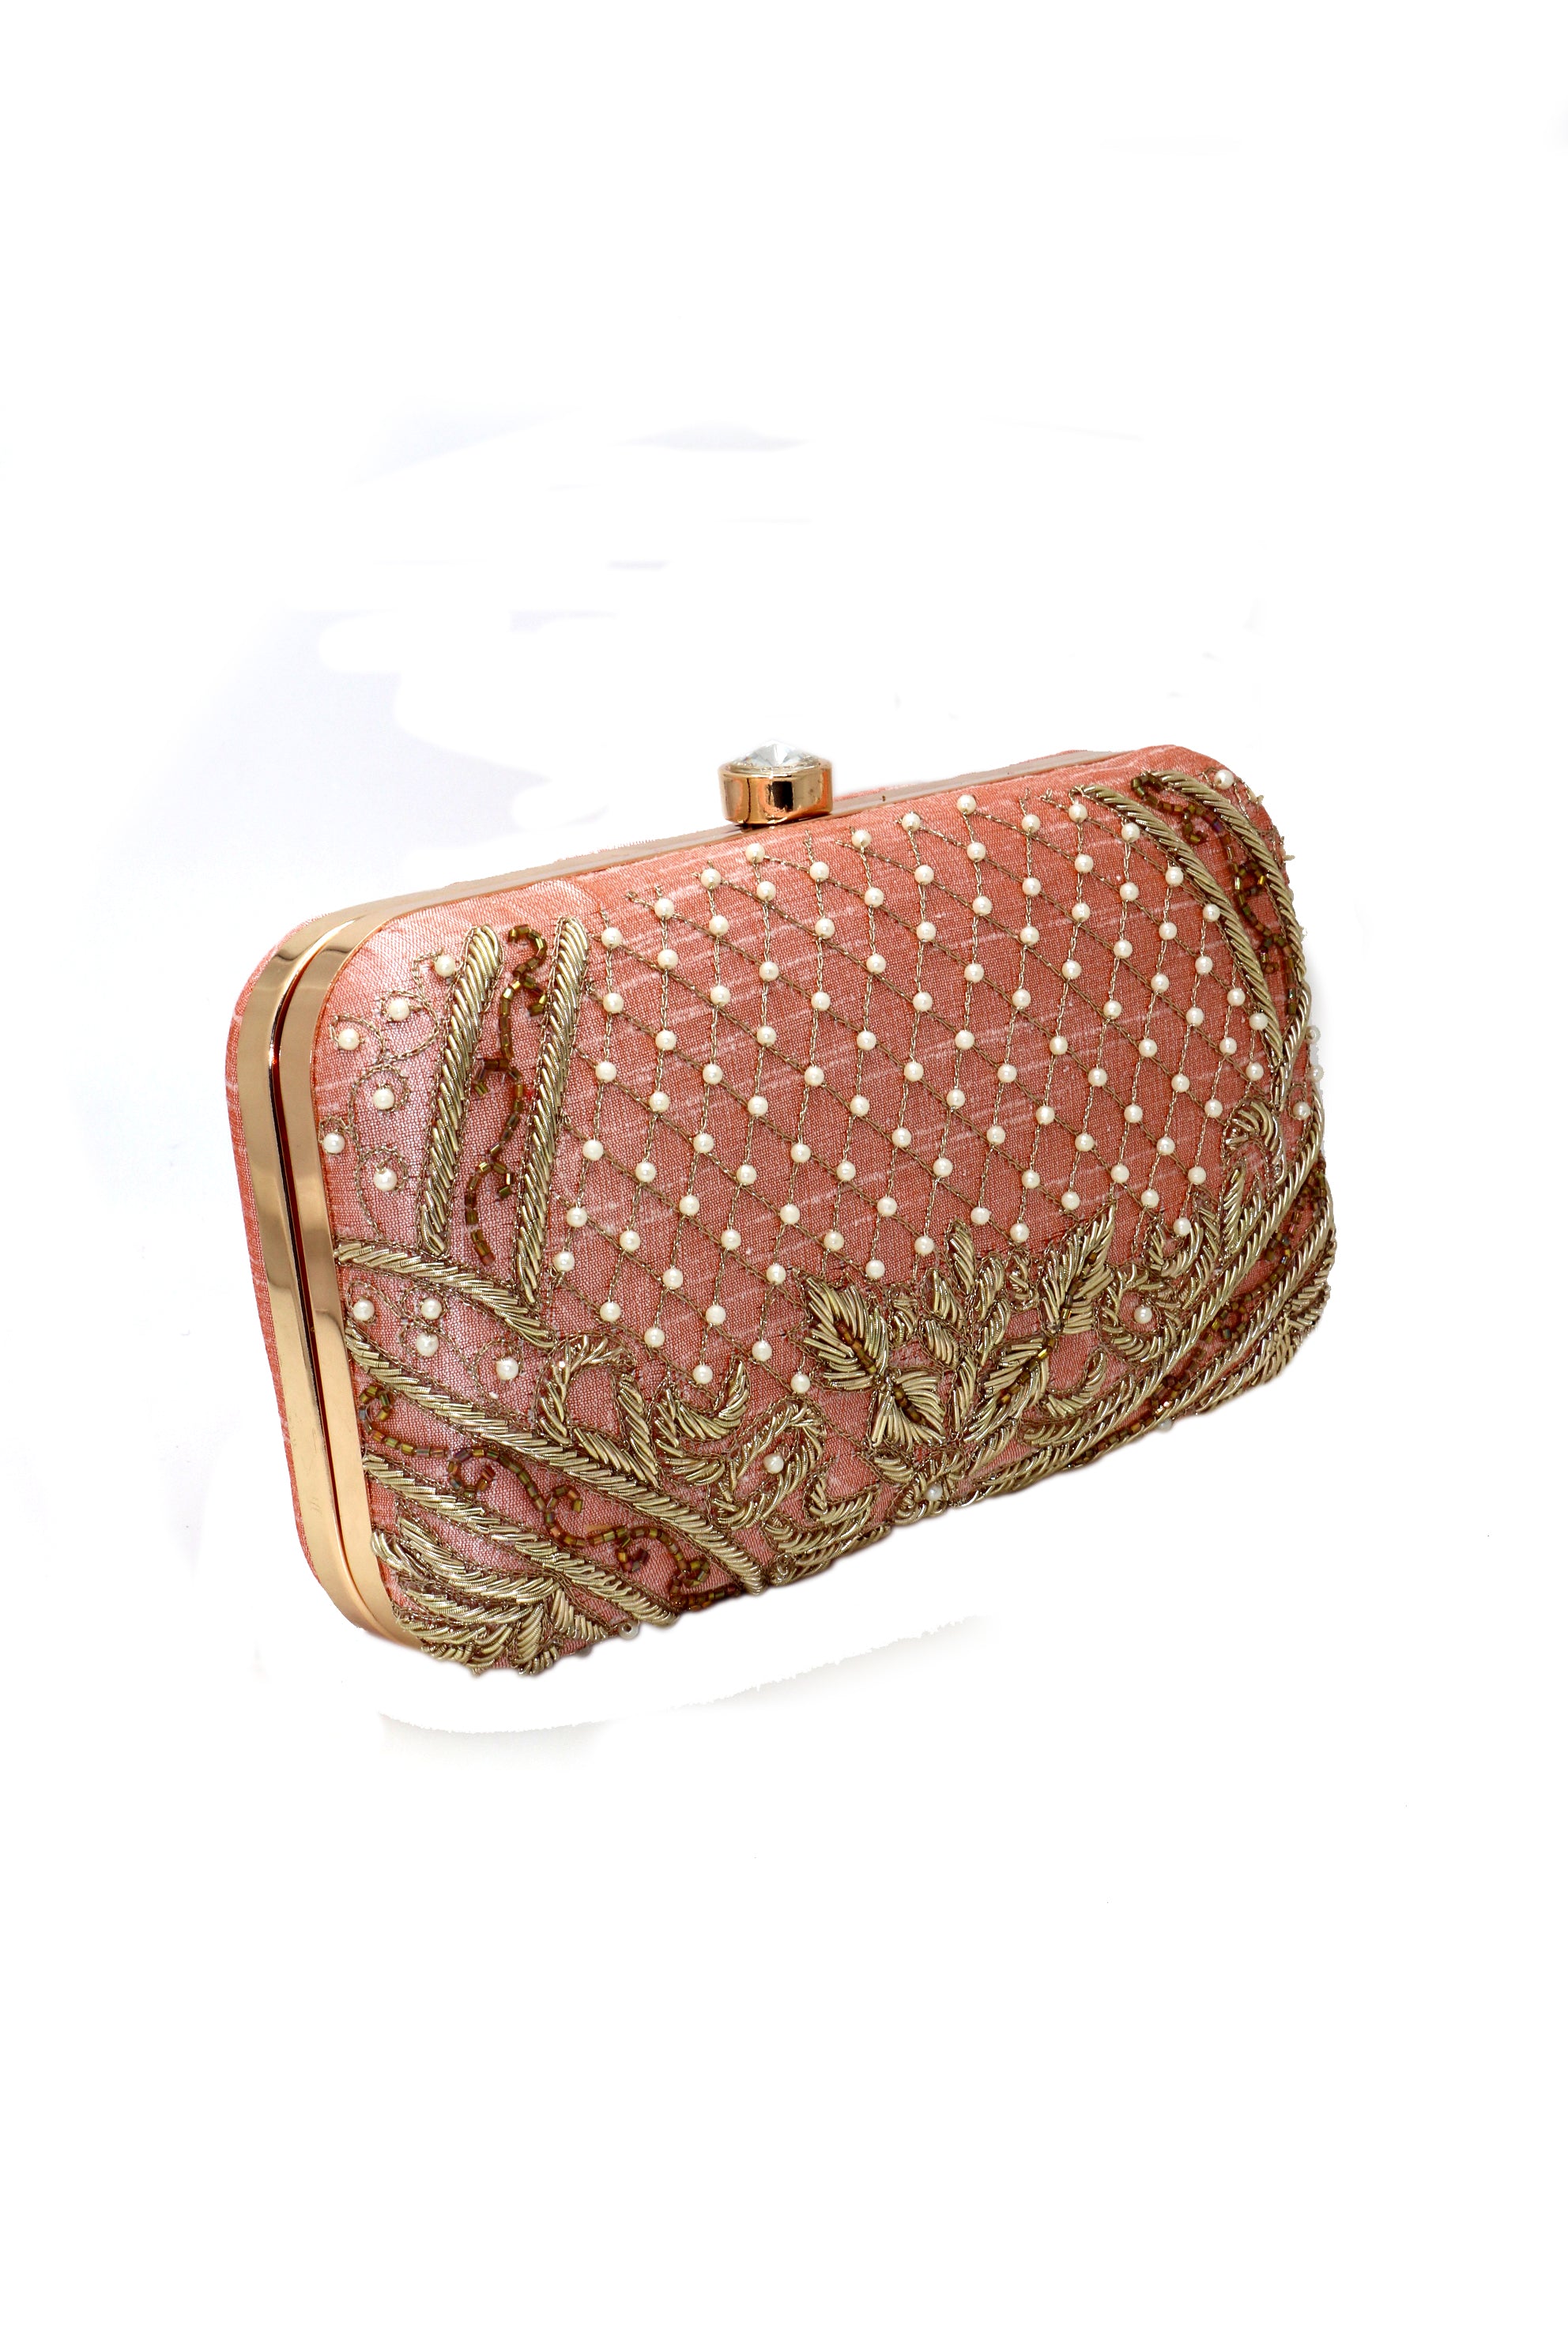 Women's Peach Color Adorn Embroidered & Embelished Party Clutch - VASTANS